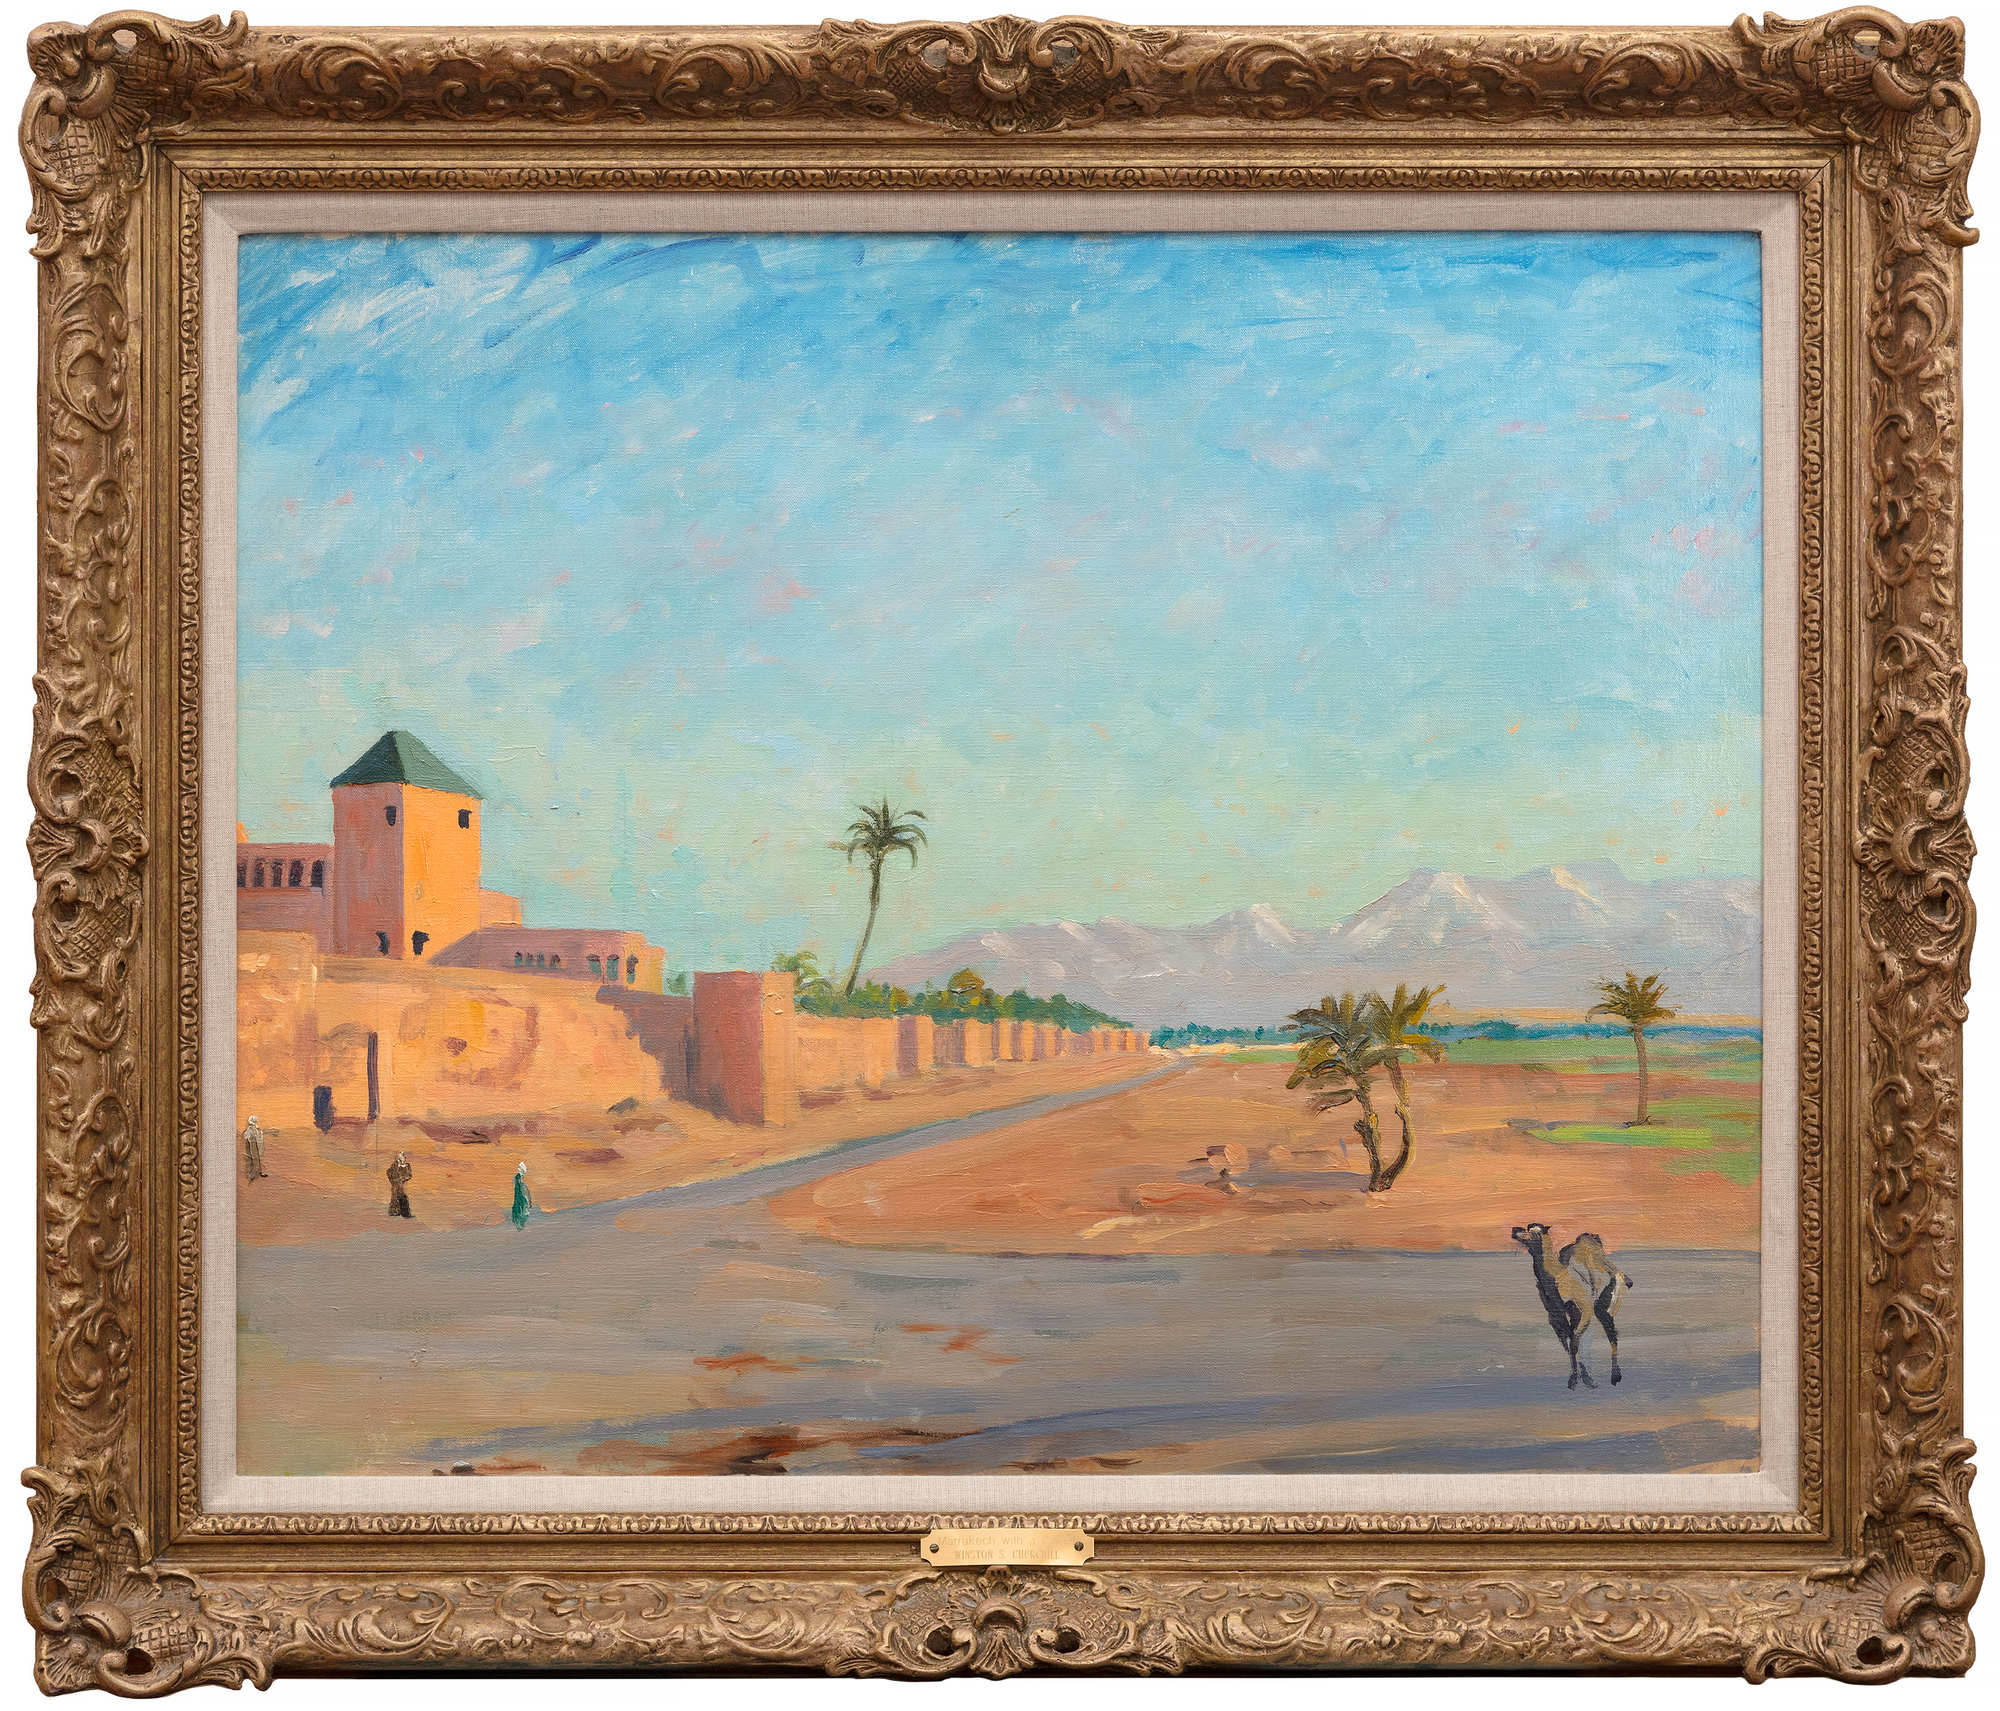 An outstanding example of Churchill’s North African scenes, one in which he deftly captures the scenery and light that his artistic mentor, John Lavery, had told him about in the mid 1930s.  Another artist mentor, Walter Sickert, taught Churchill how to project photo images directly on to a canvas as an aid in painting, a technique used to advantage in this instance.  The Studio Archives at Chartwell include 5 photographs, one of the camel and four others, that Churchill used as aids.
<br>
<br>With the visual aids, Churchill could focus on the vibrant colors, the tan of the sand and buildings contrasting with the brilliant blue skies, splashes of green adding energy to the painting. A different Marrakech scene, “Tower of the Koutoubia Mosque”, set an auction record for Churchill when it sold in 2021 for $11 million USD.